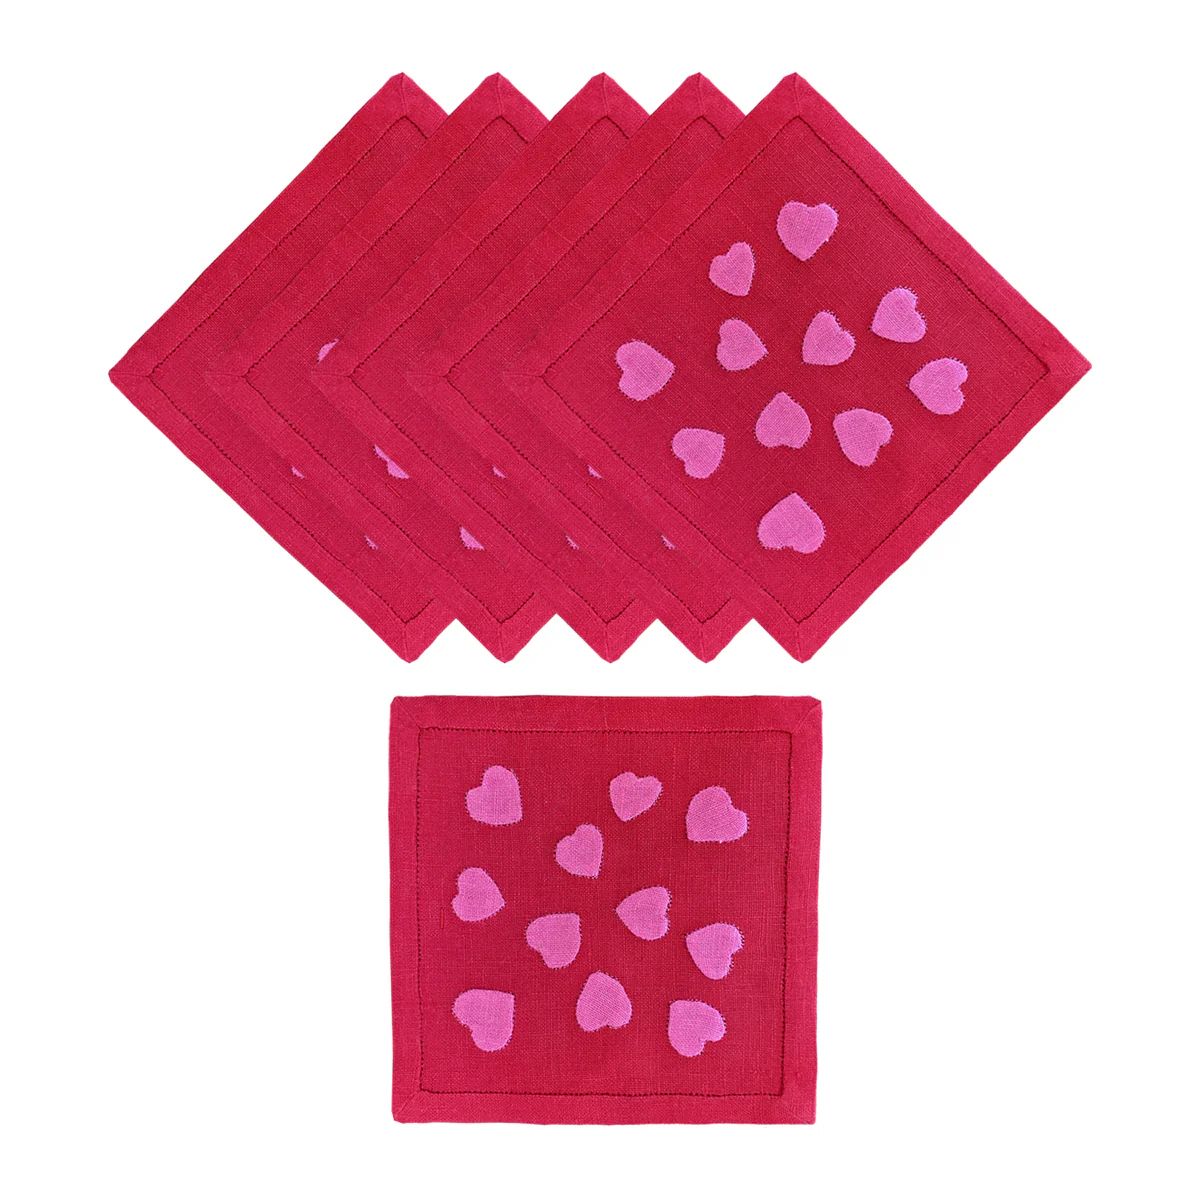 Hearts Cocktail Napkins in Red and Pink, Set of 6 | Over The Moon